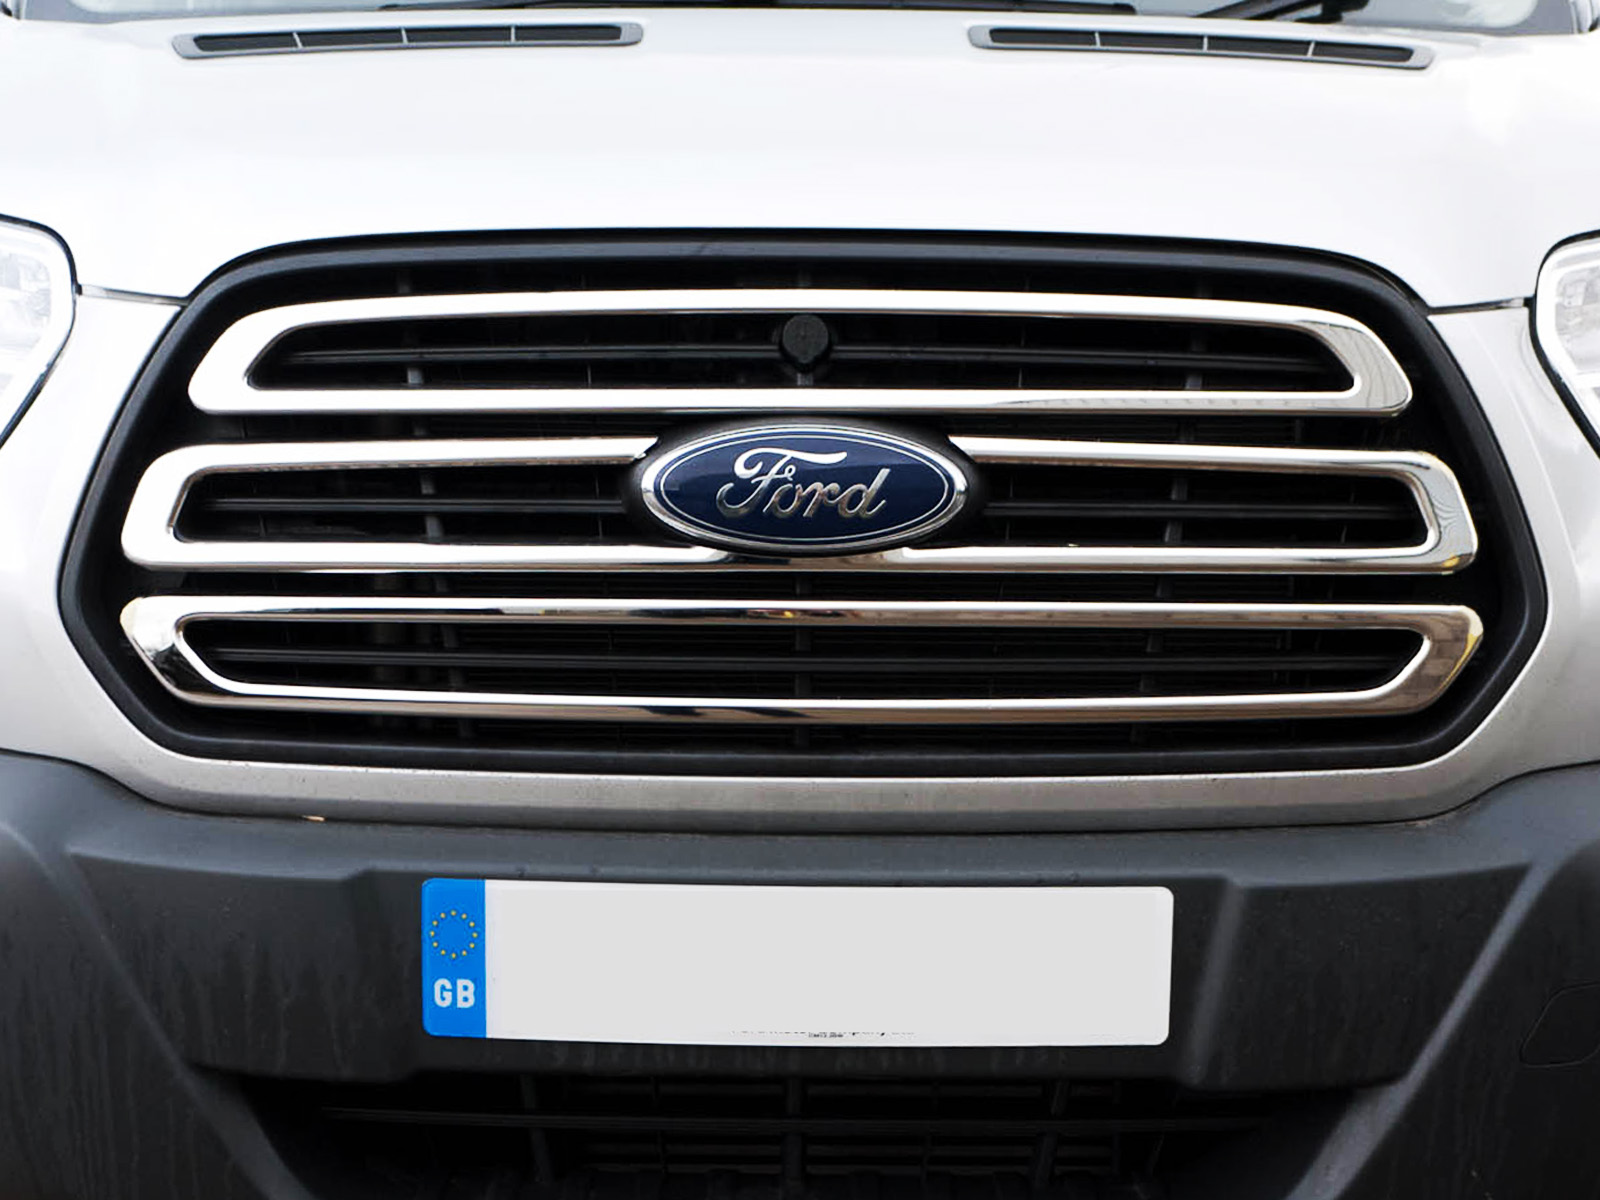 Chrome Stainless Steel 3pc Front Grille Surround for Ford Transit ...